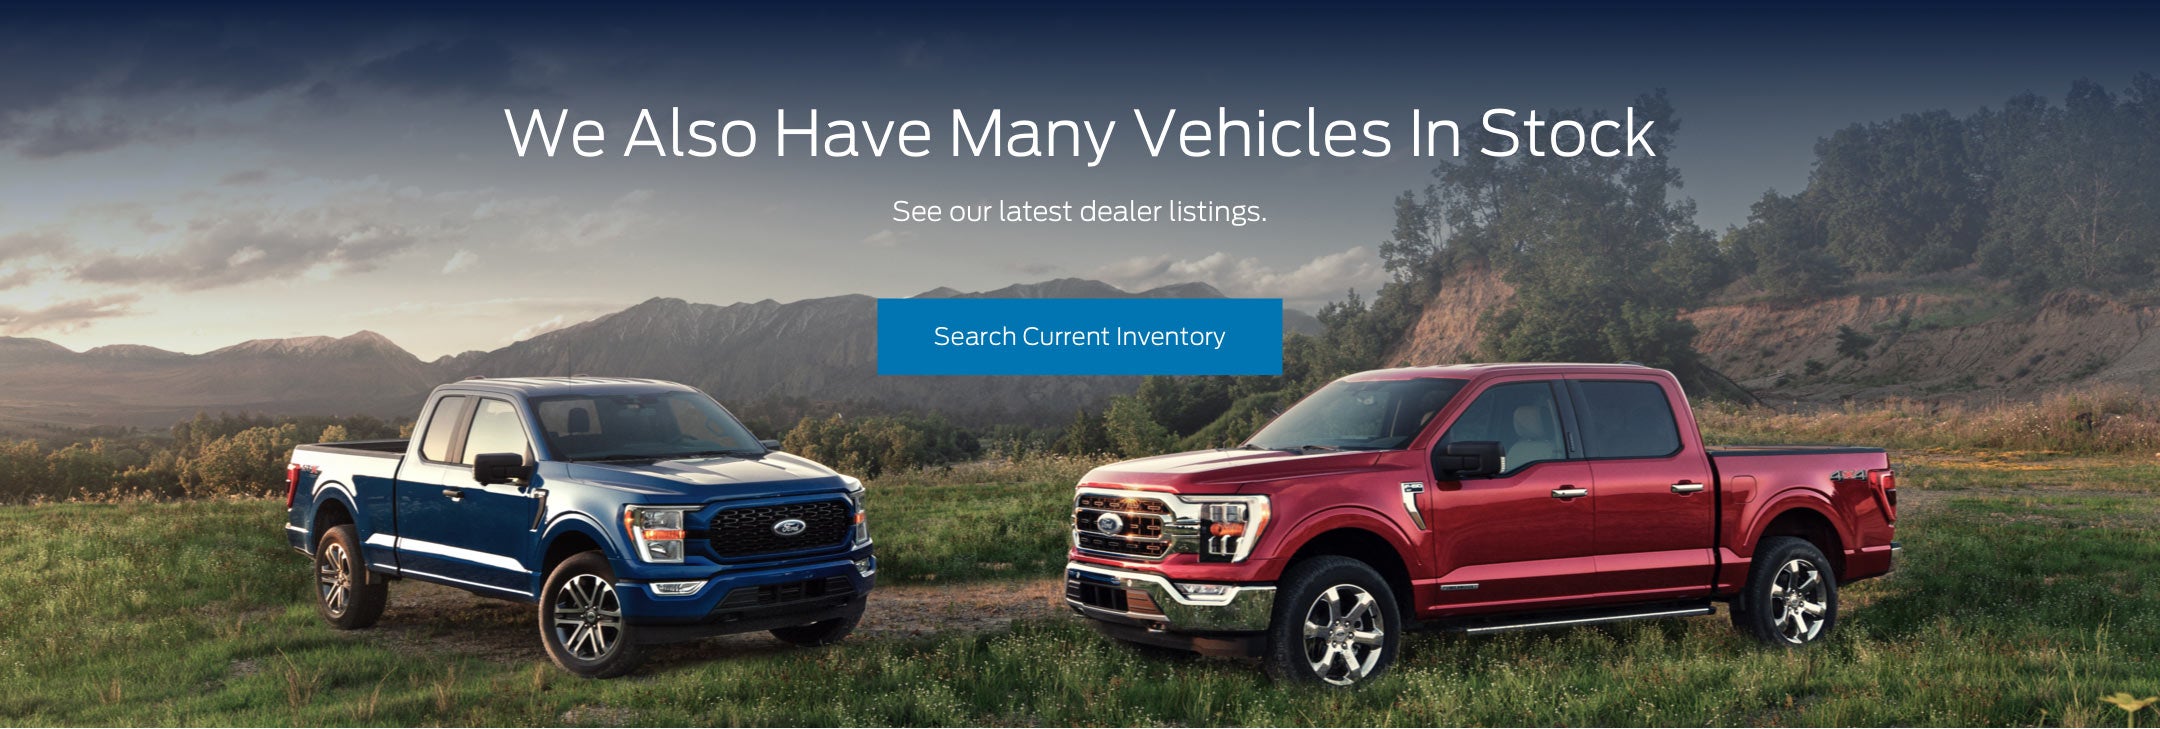 Ford vehicles in stock | Crossroads Ford Wake Forest in Wake Forest NC